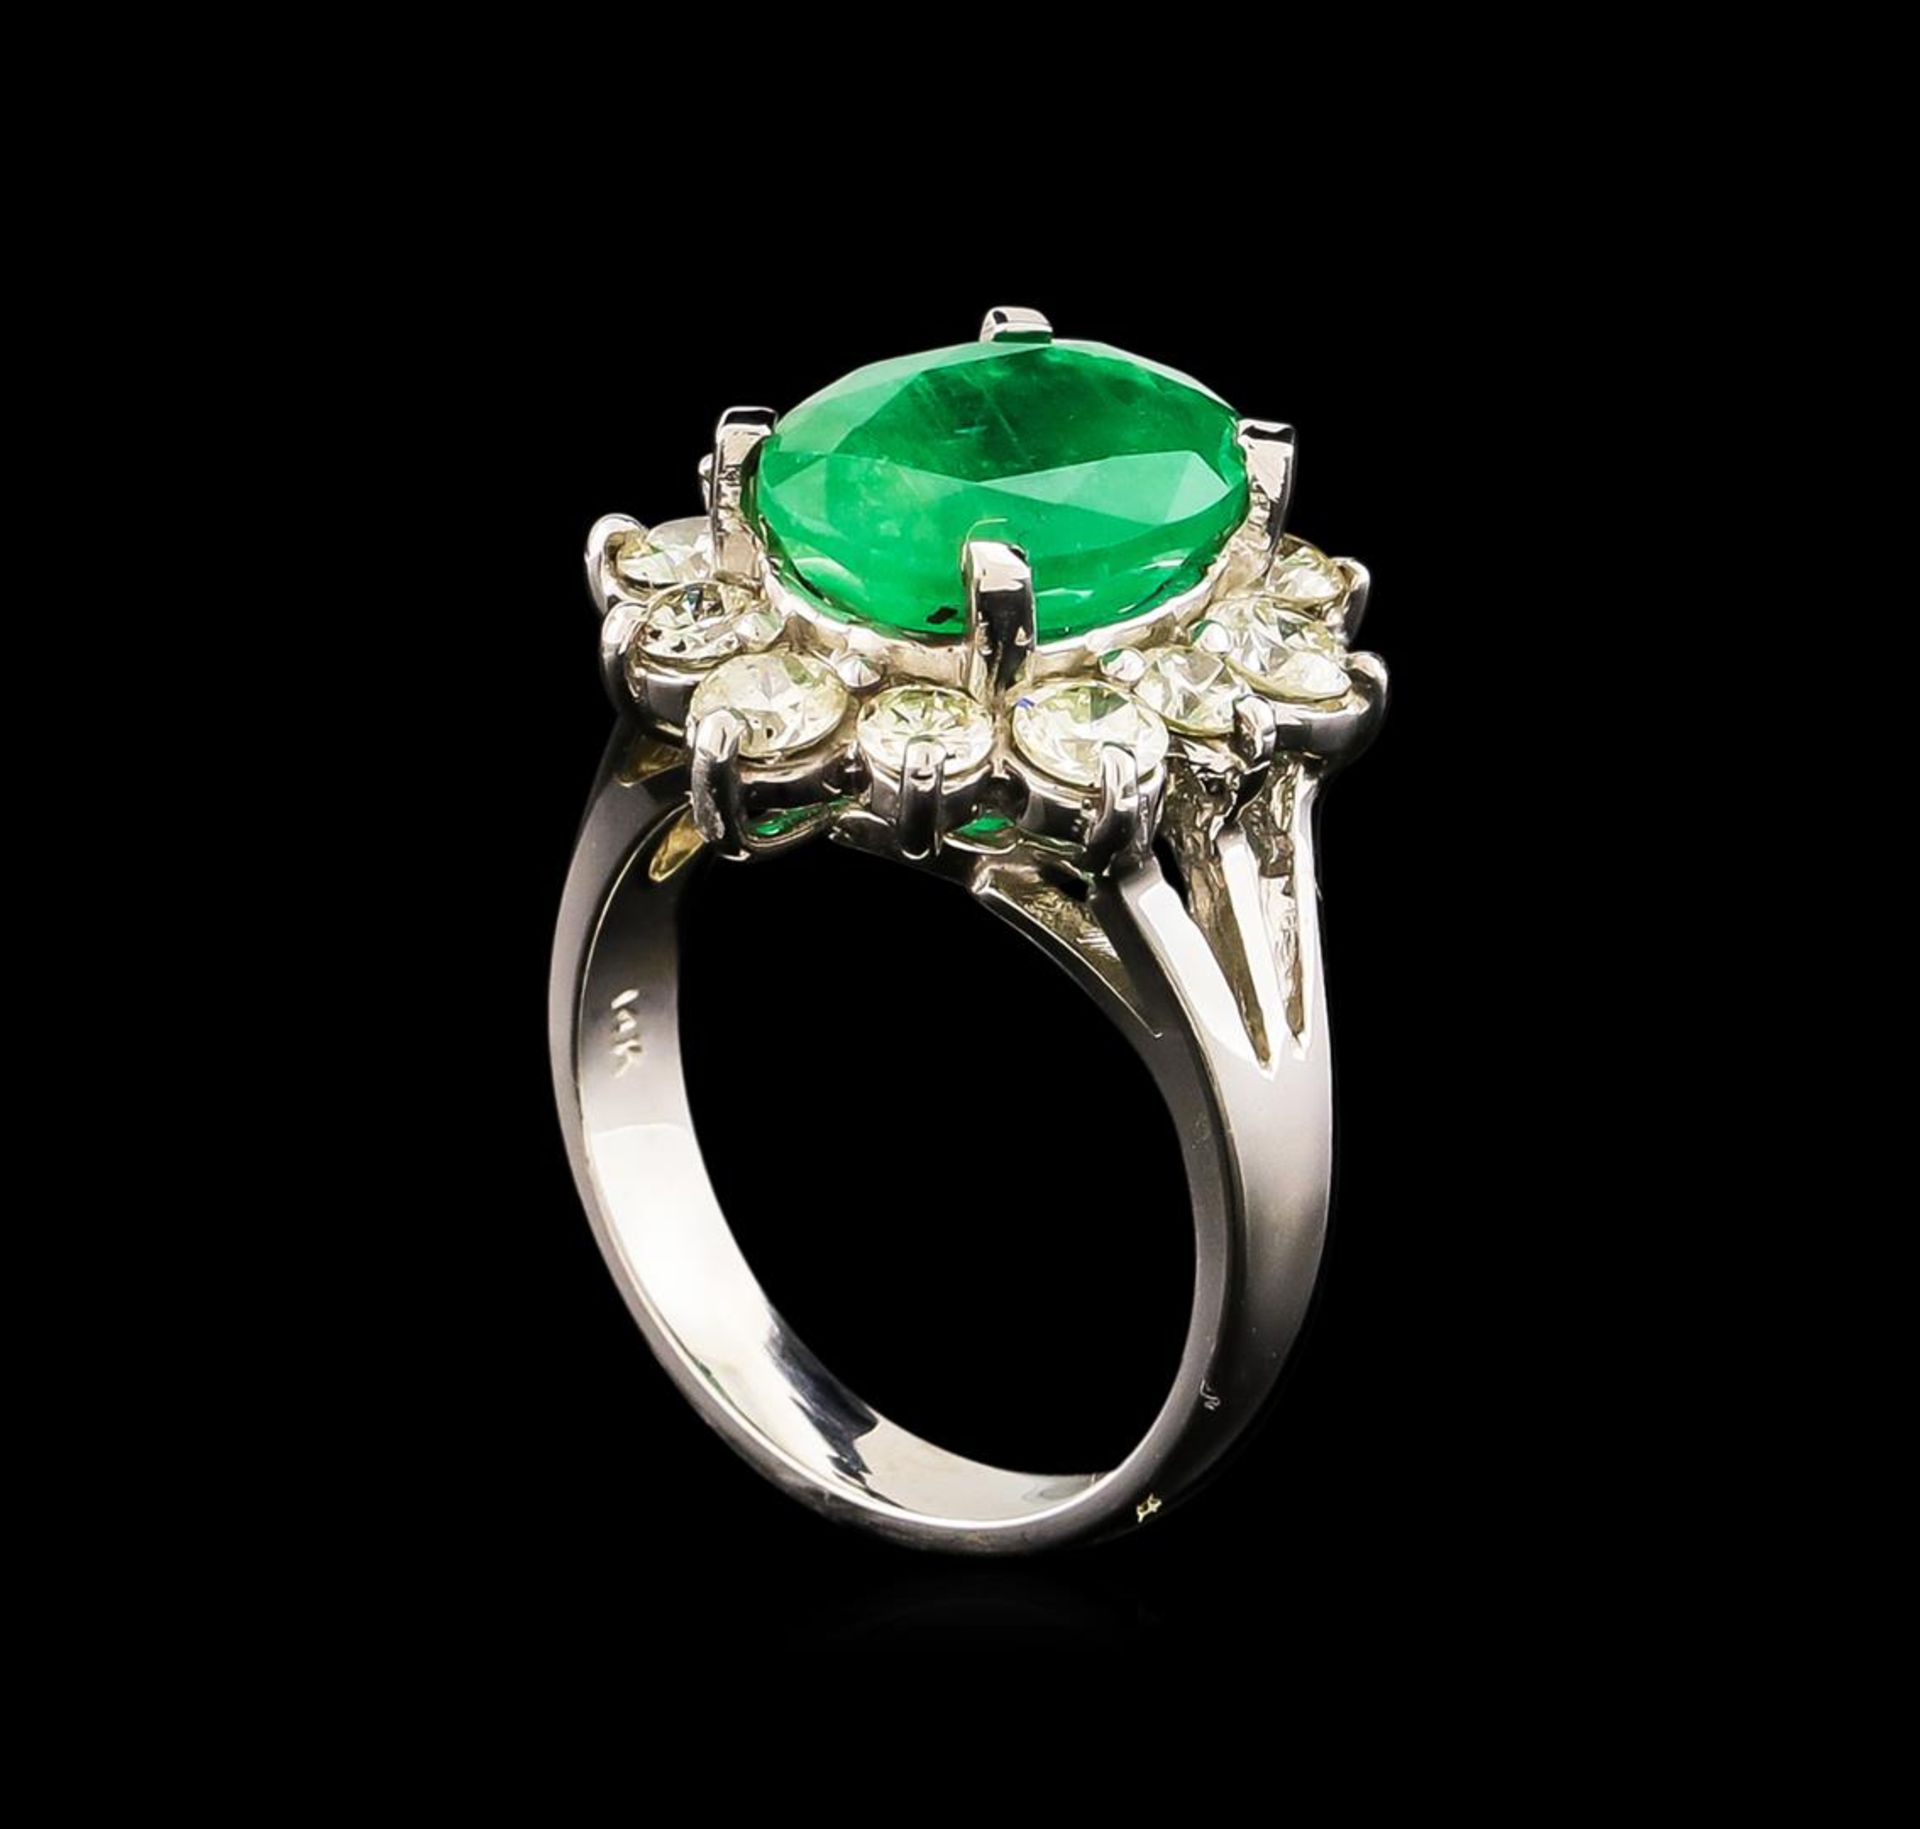 14KT White Gold 3.41 ctw Emerald and Diamond Ring - Image 4 of 5